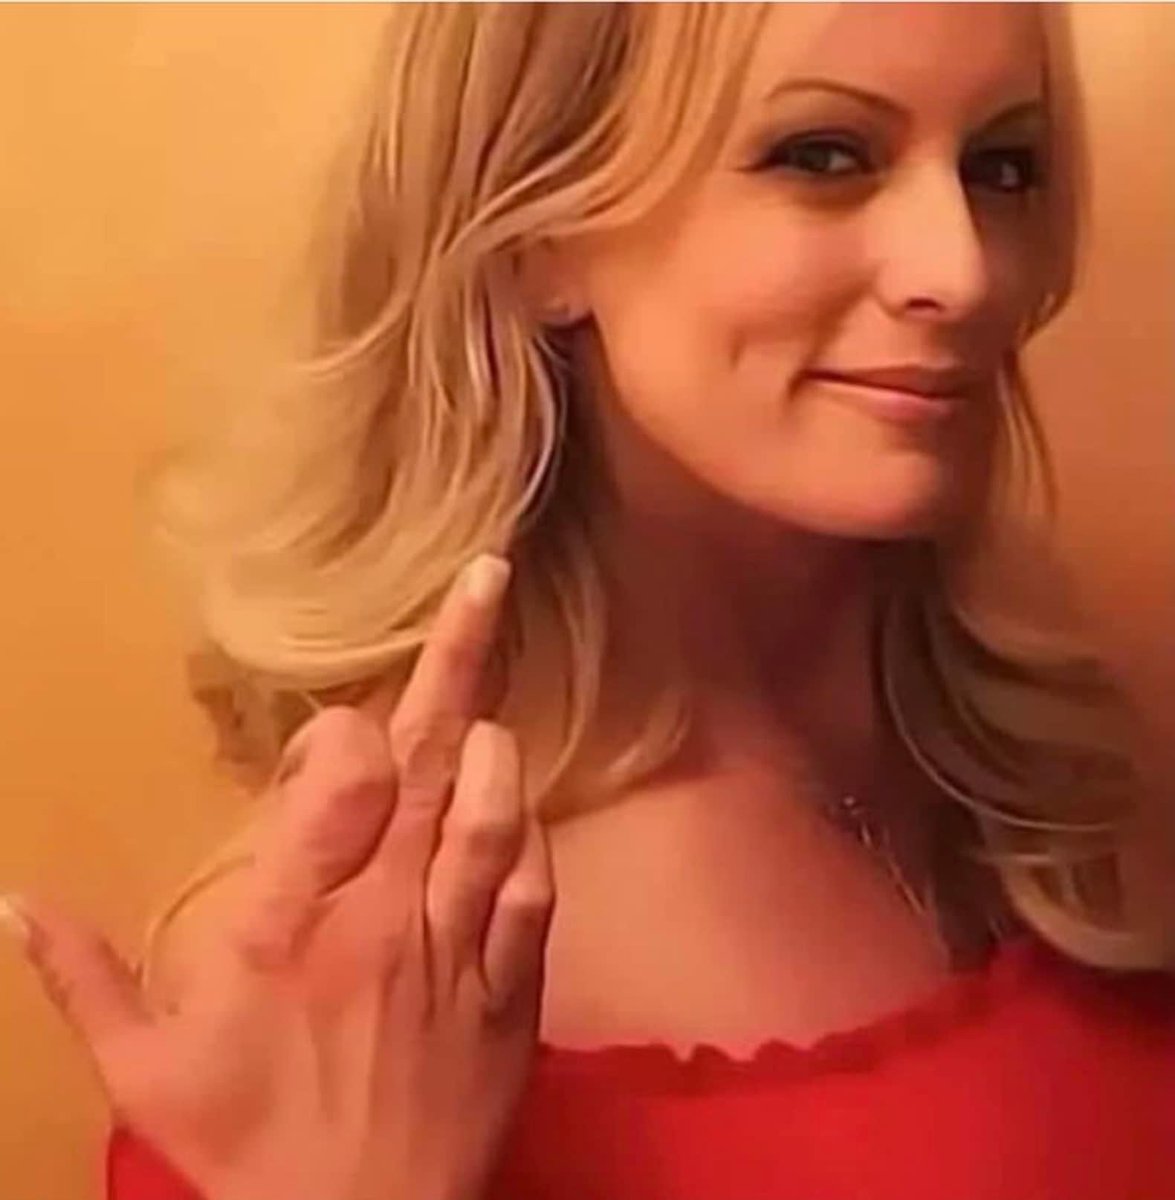 I think Stormy speaks for all of us!